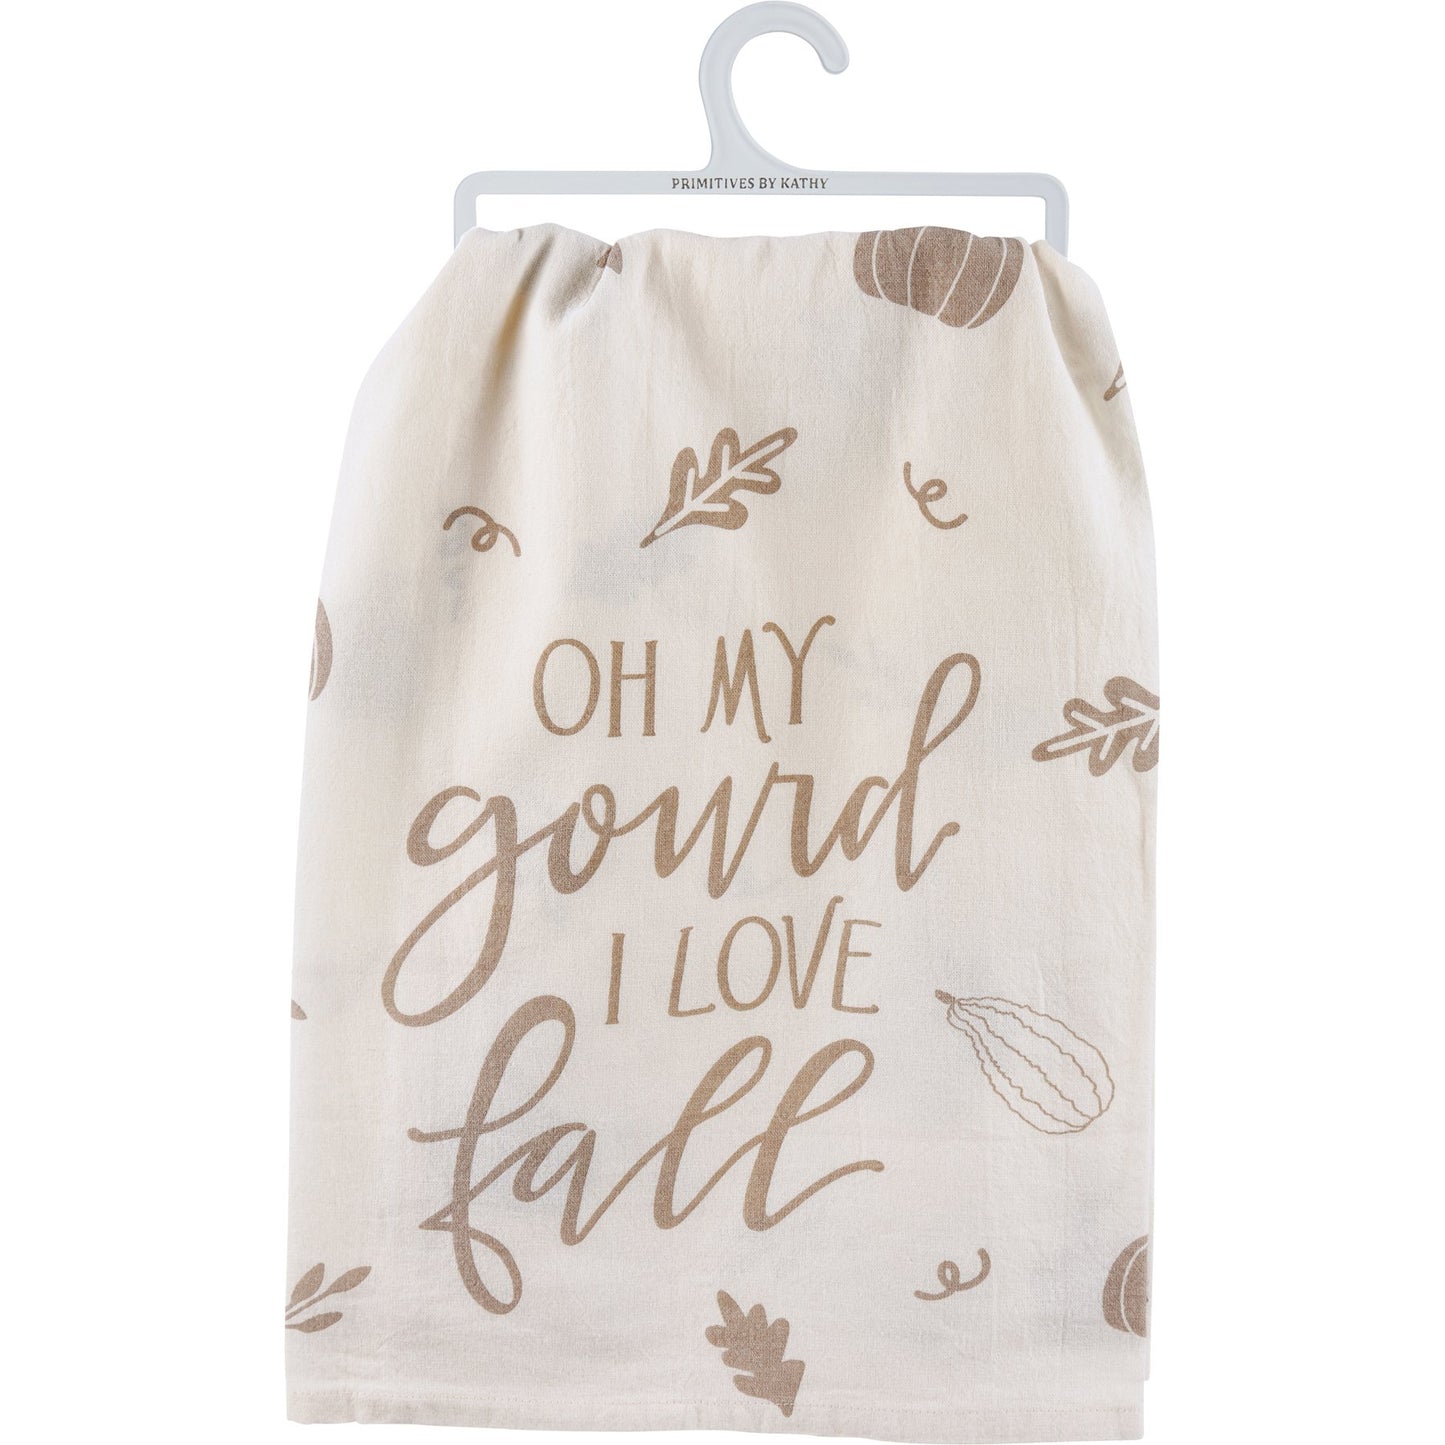 Kitchen Towel - Oh My Gourd I Love Fall